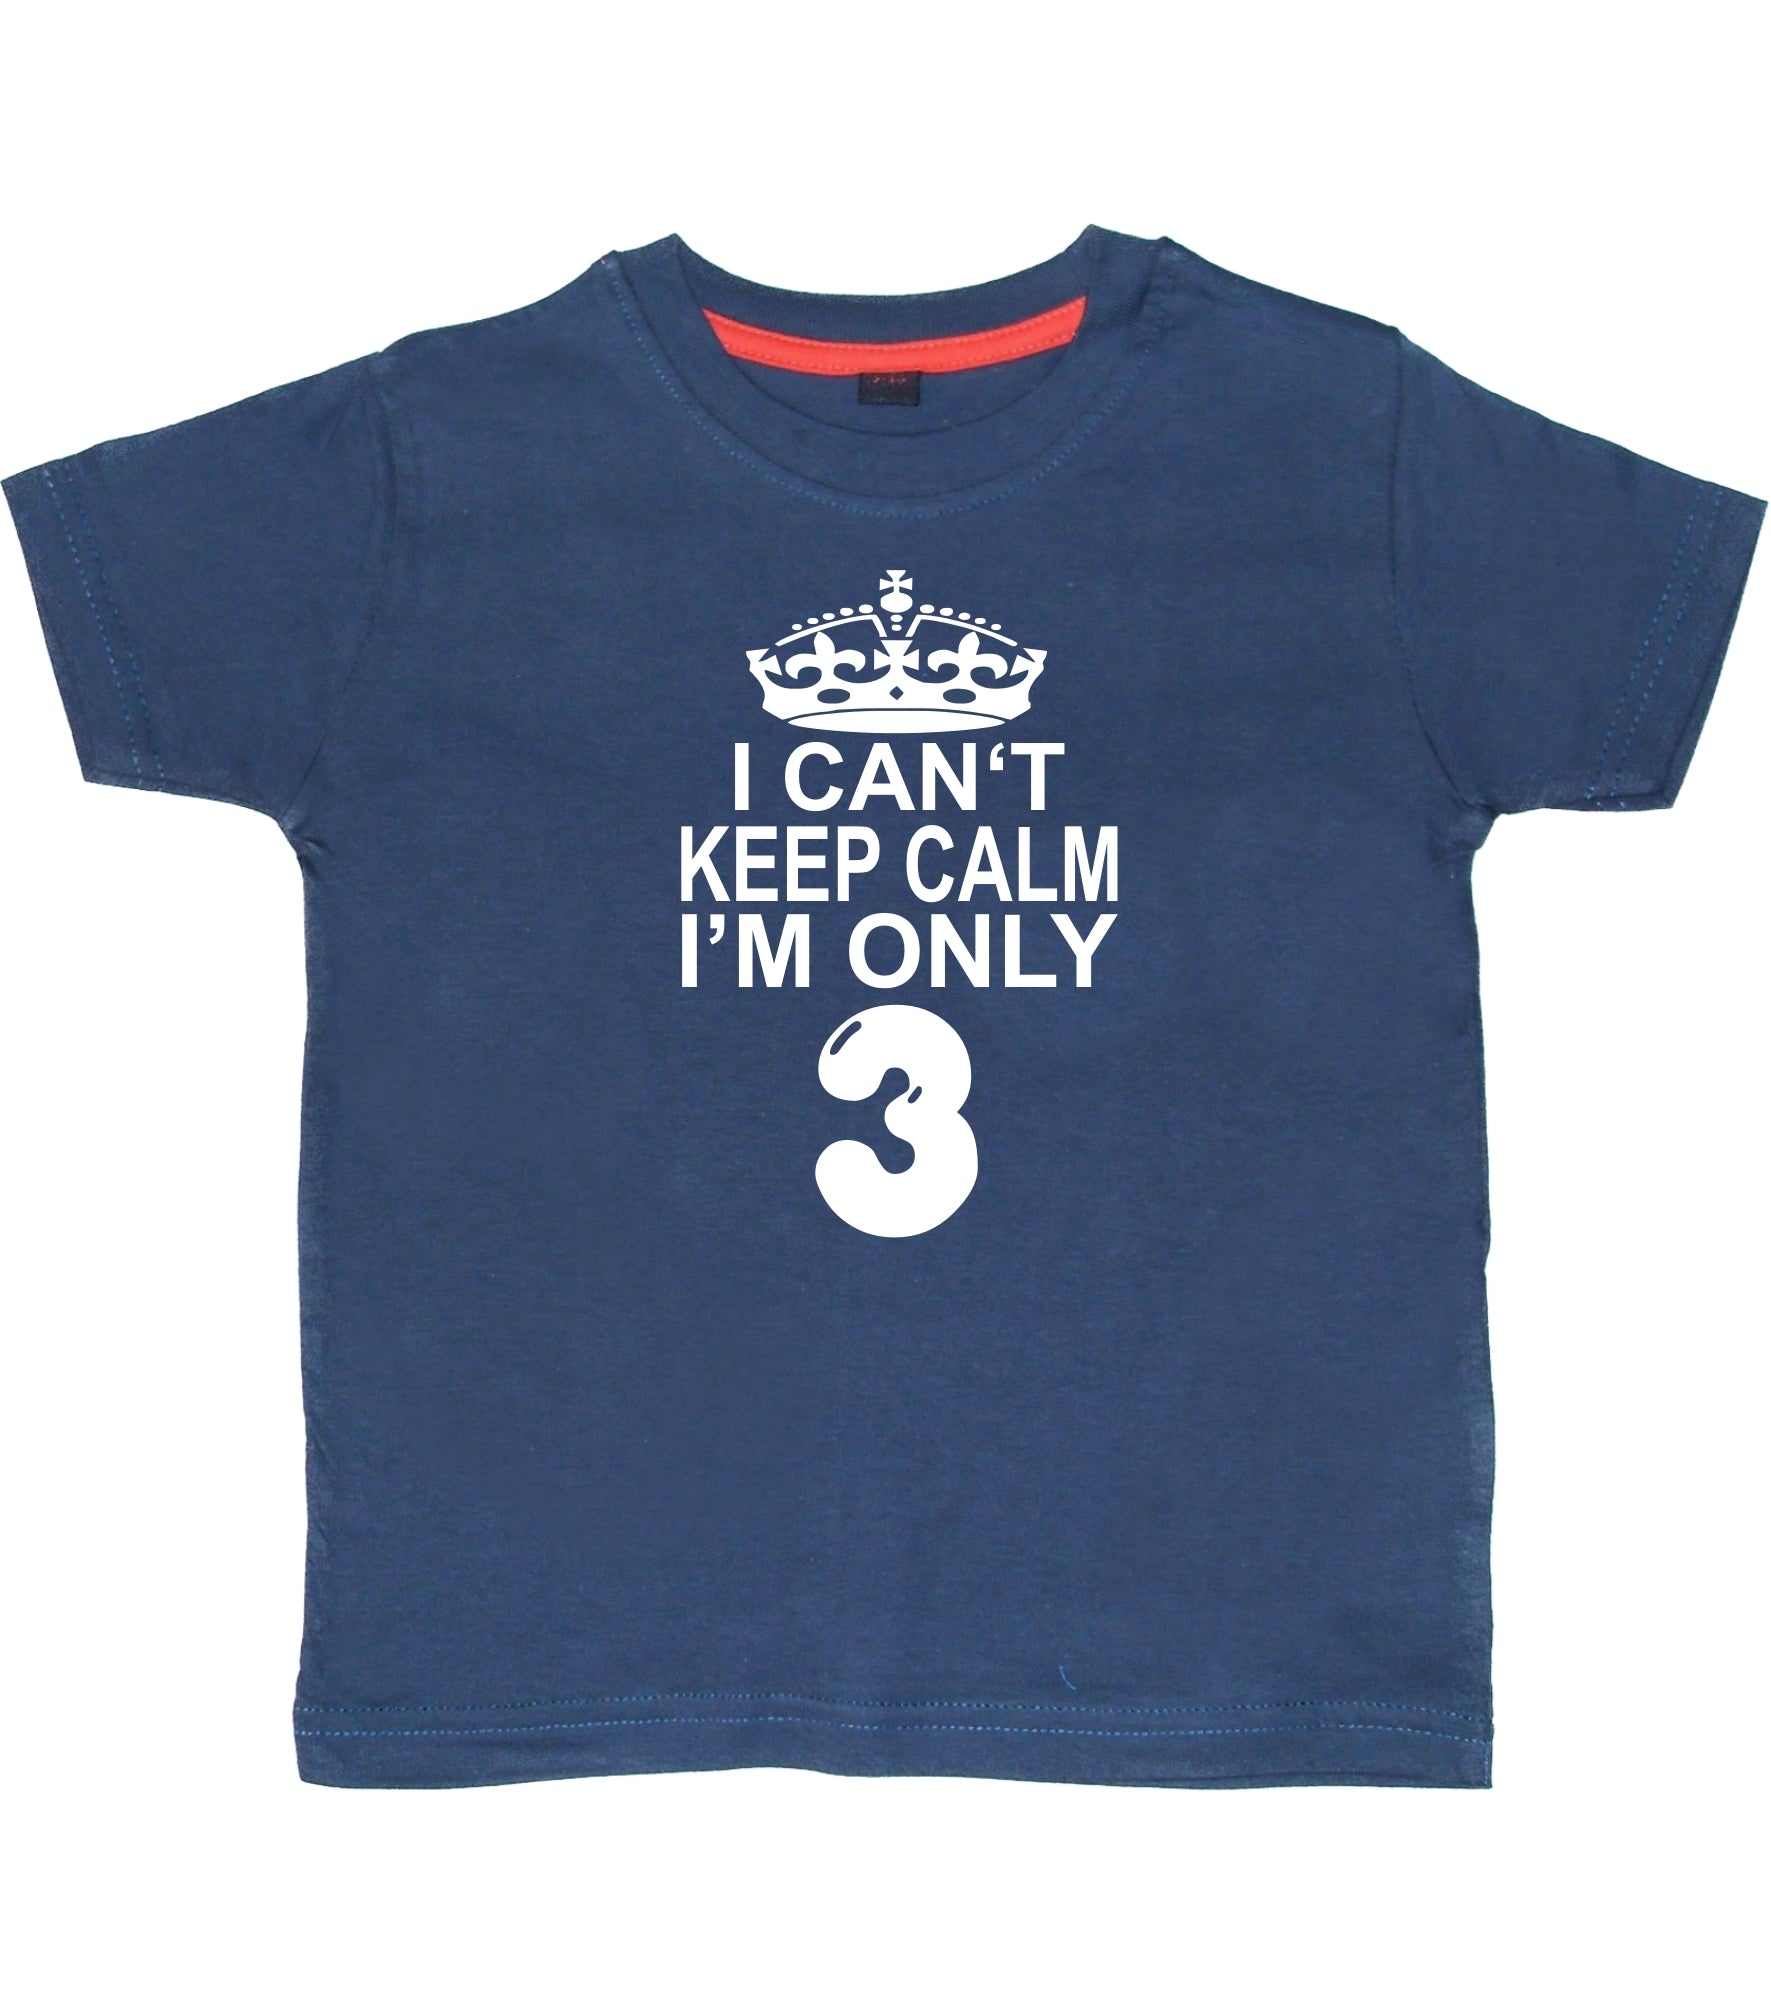 I Cant Keep Calm I'm Only 3. Children's T-Shirt